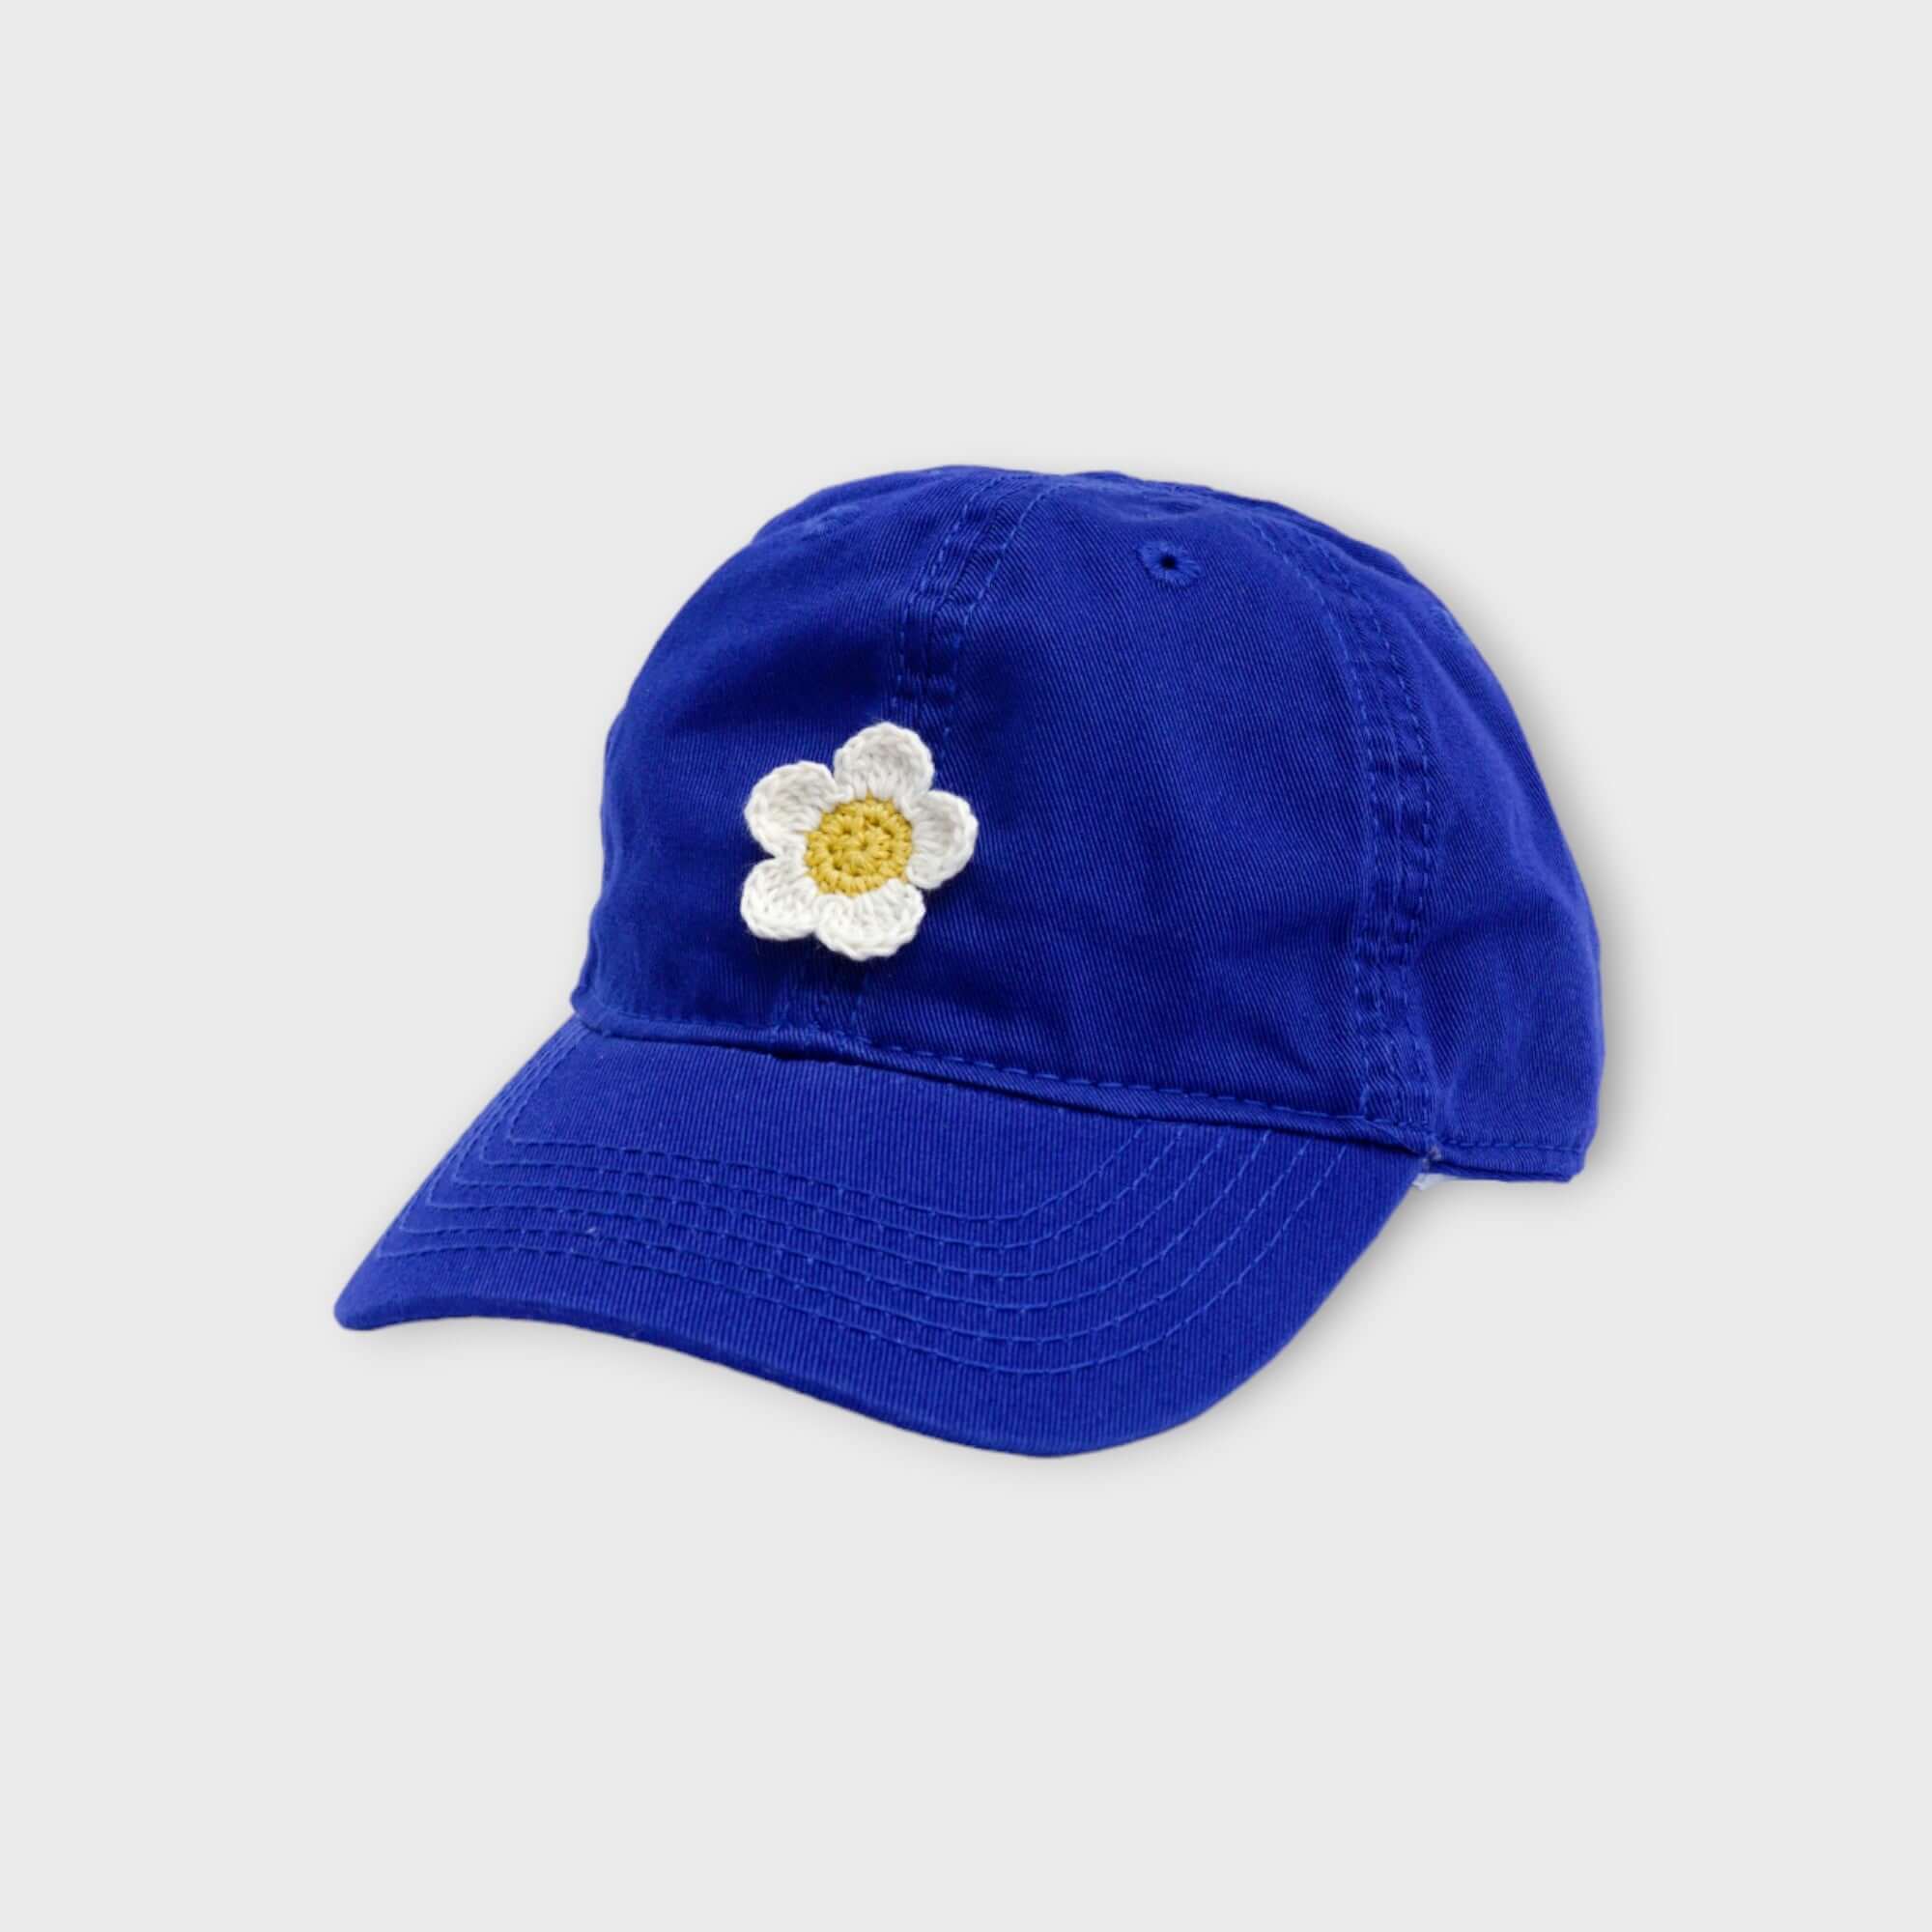 cobalt baseball hat with white daisy applique